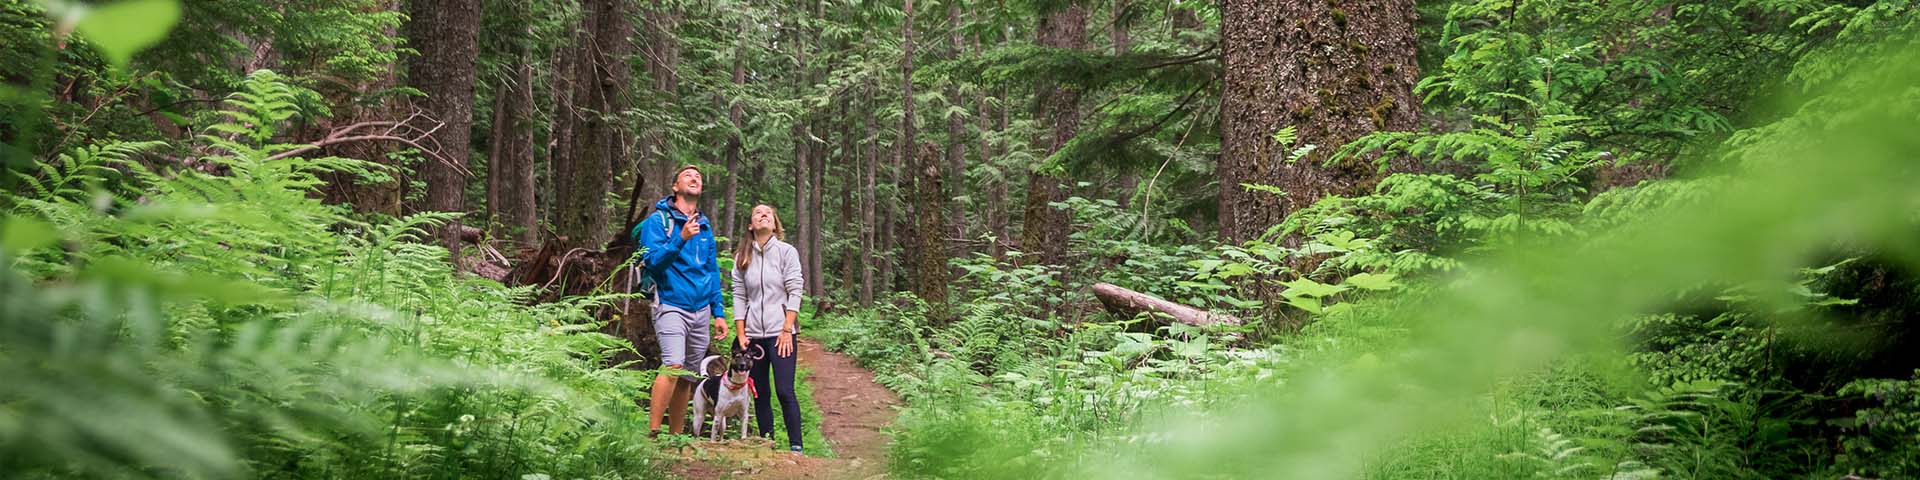 two people and a dog hiking in a forest